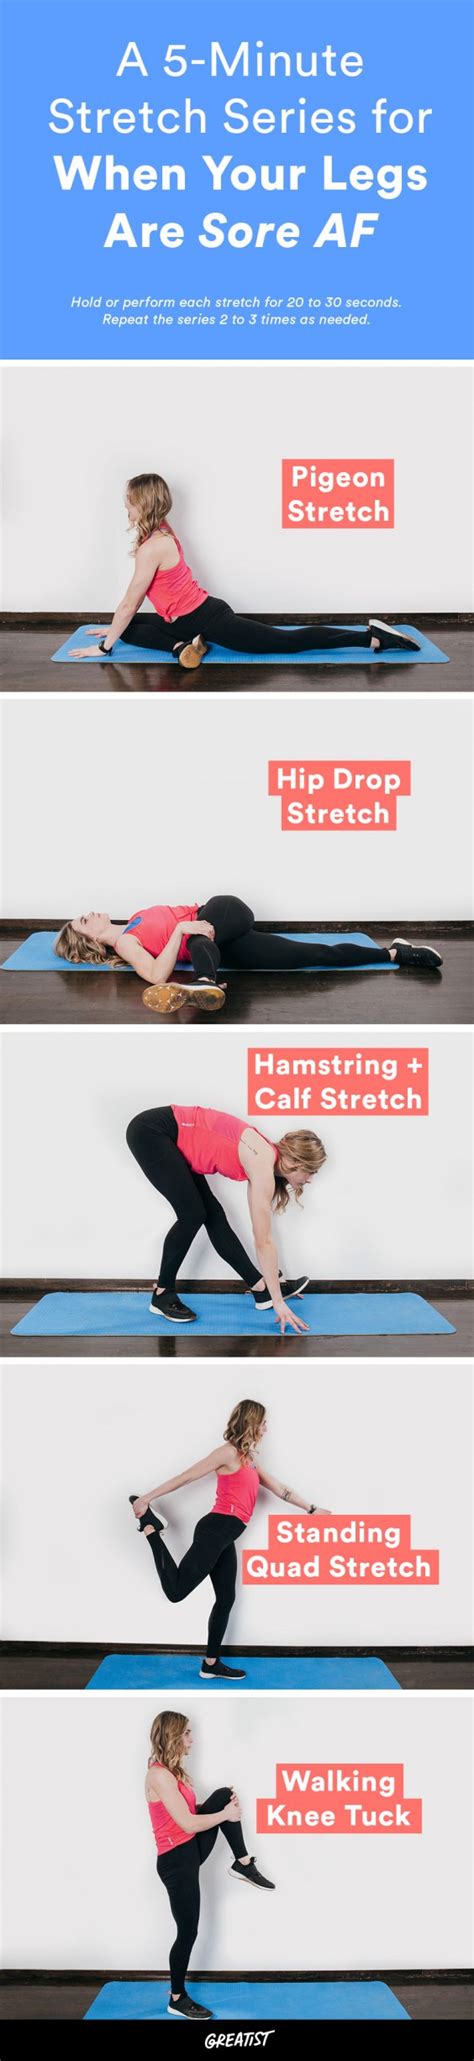 Stretching Exercises 19 Lower Body Stretches Your Body Needs Greatist